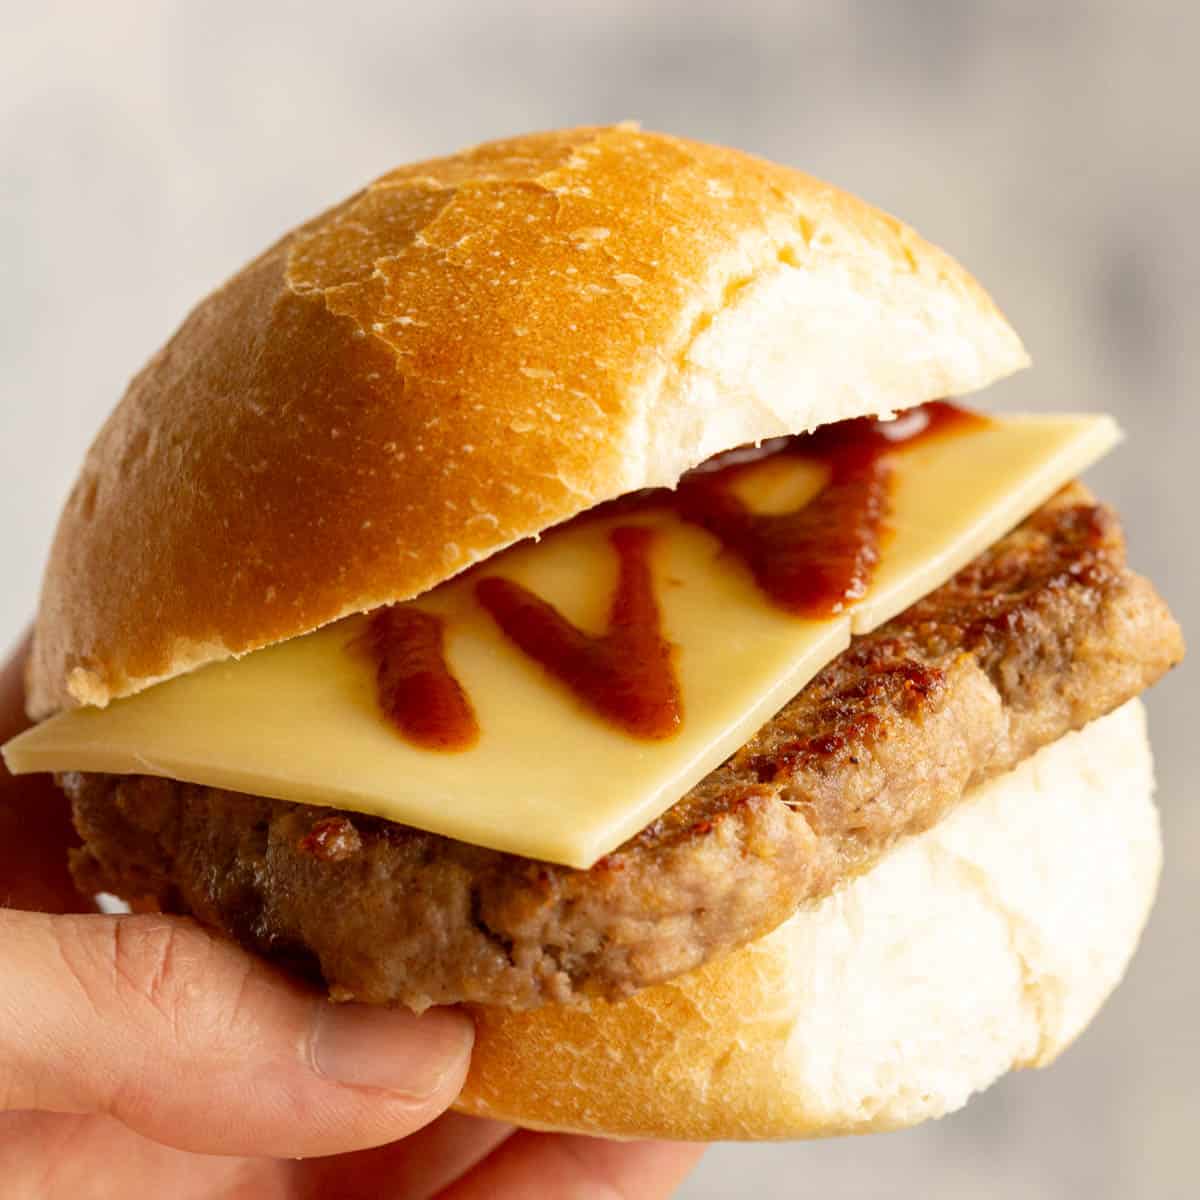 Square sausage in a breakfast bun with cheese and brown sauce.